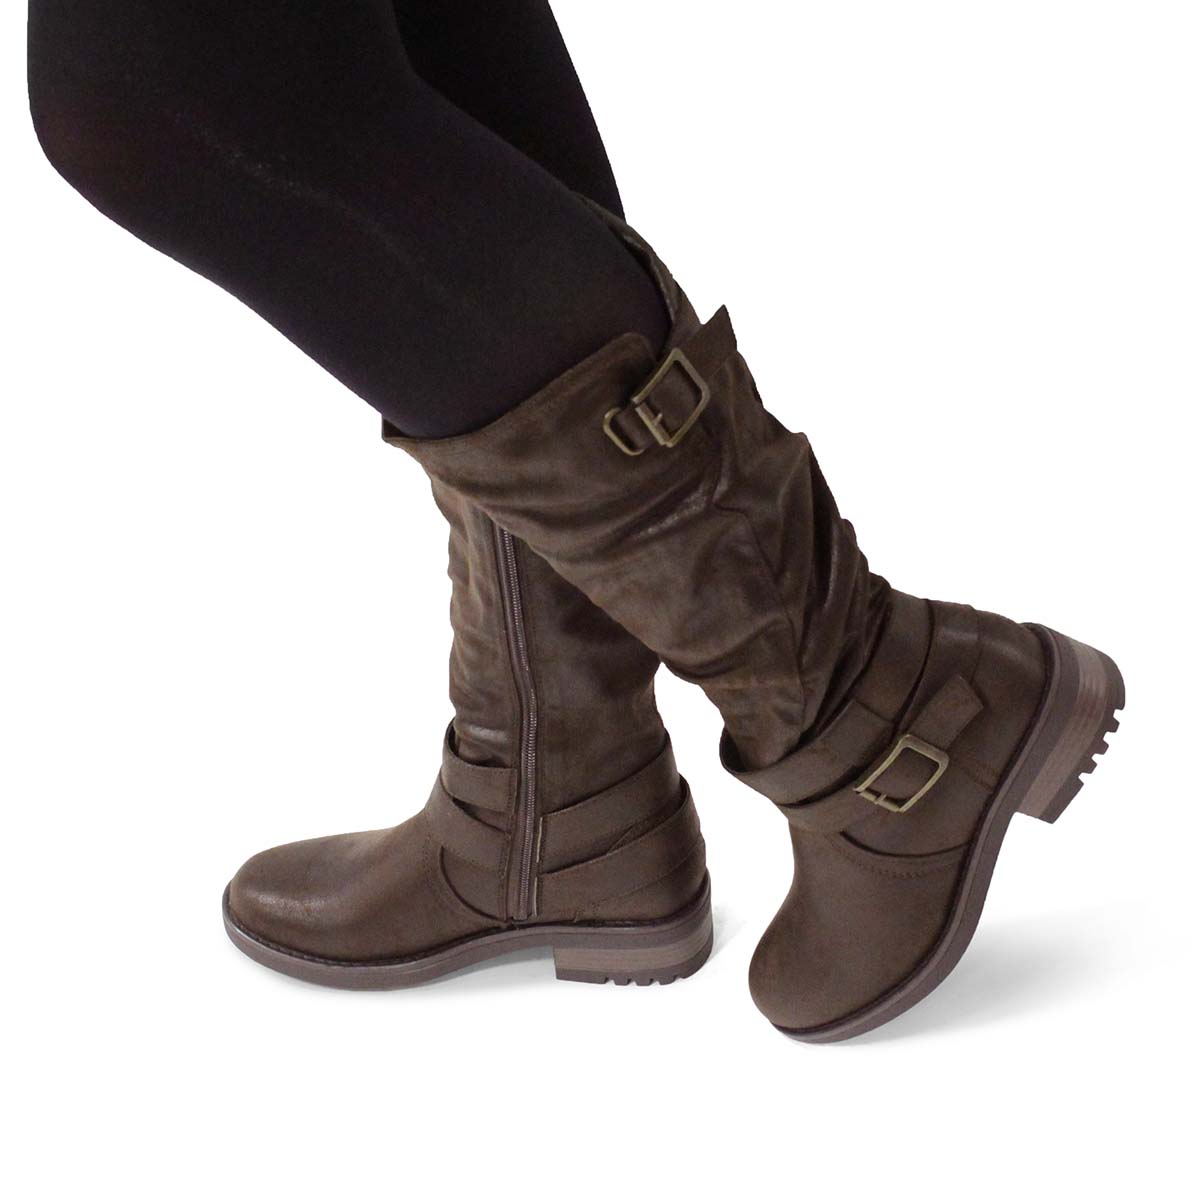 softmoc wide calf boots